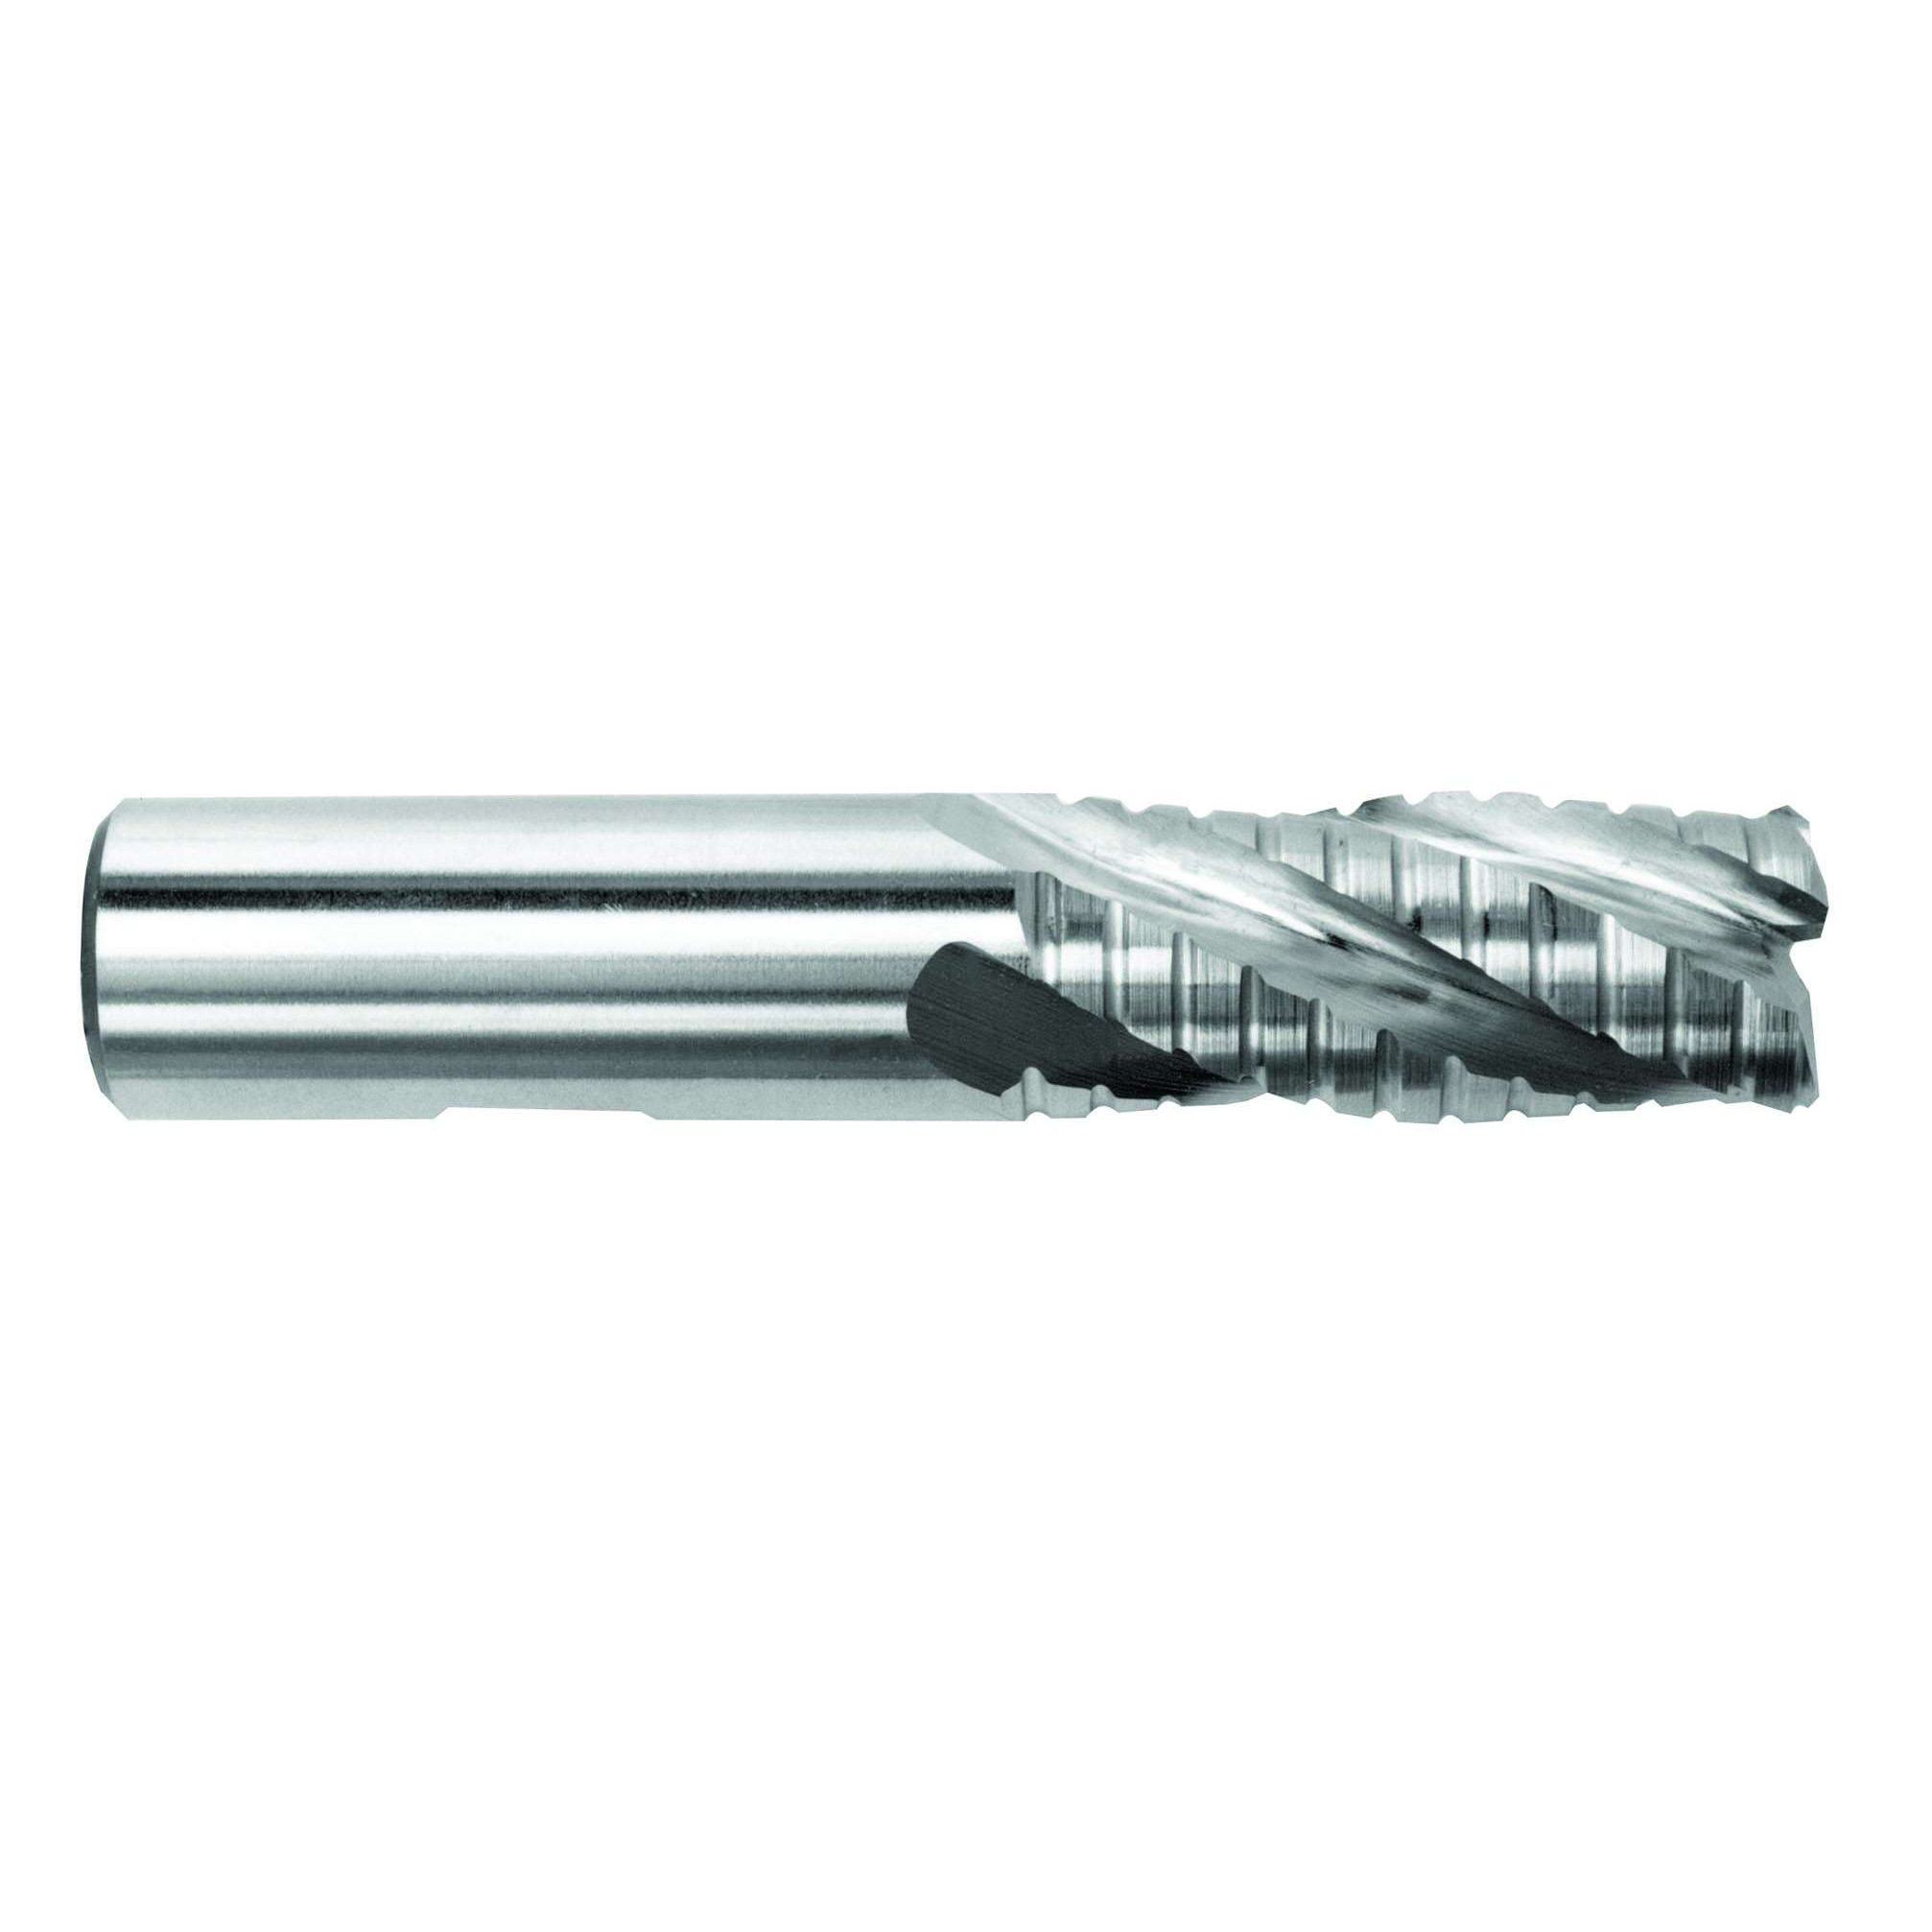 Rougher-Finisher End Mills